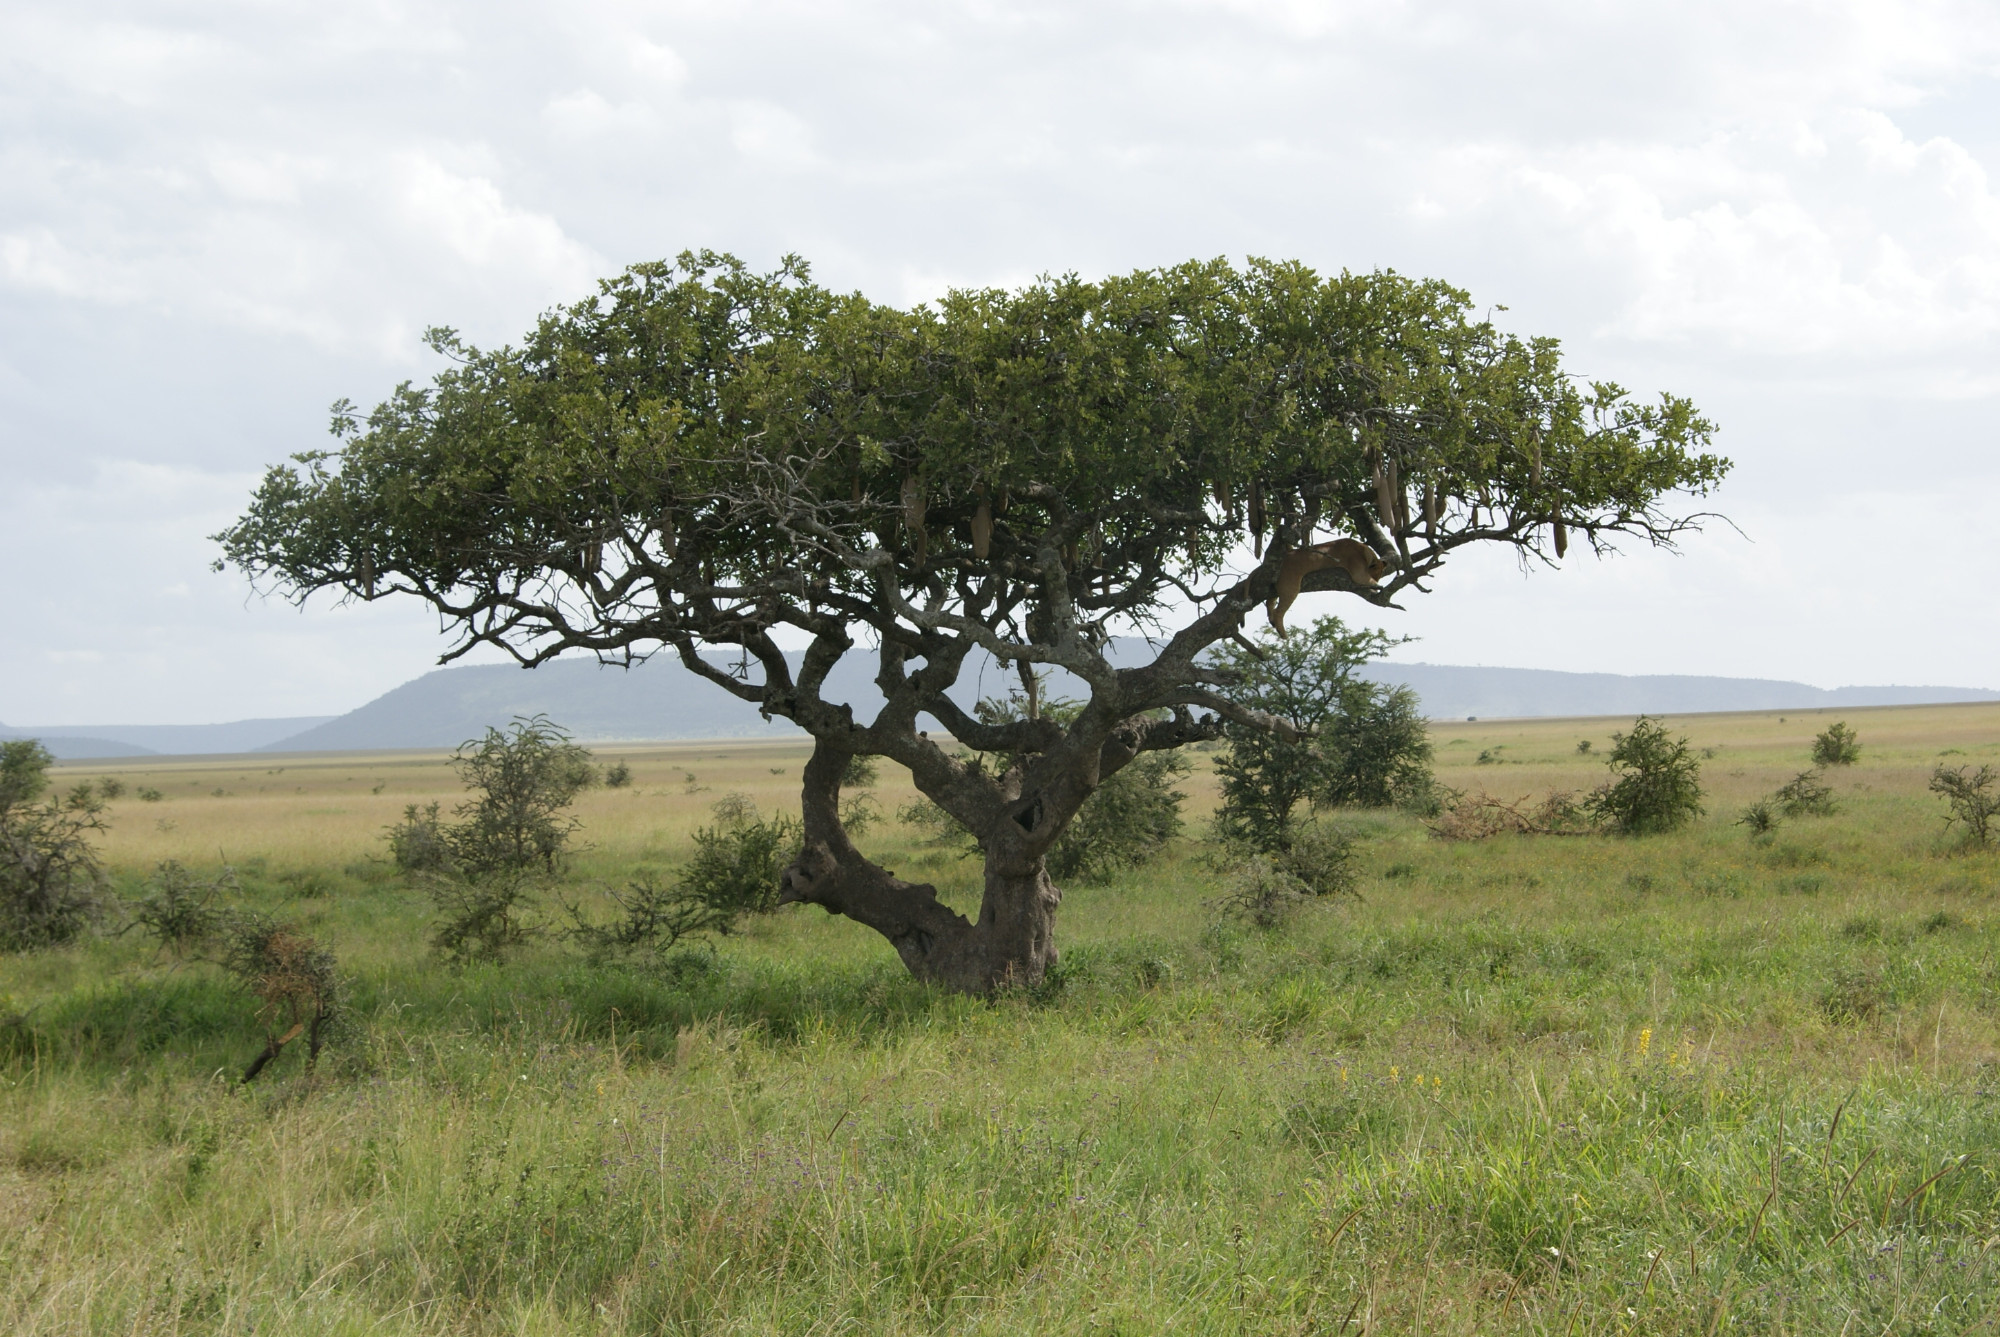 Acacia Tree complete with Leopard